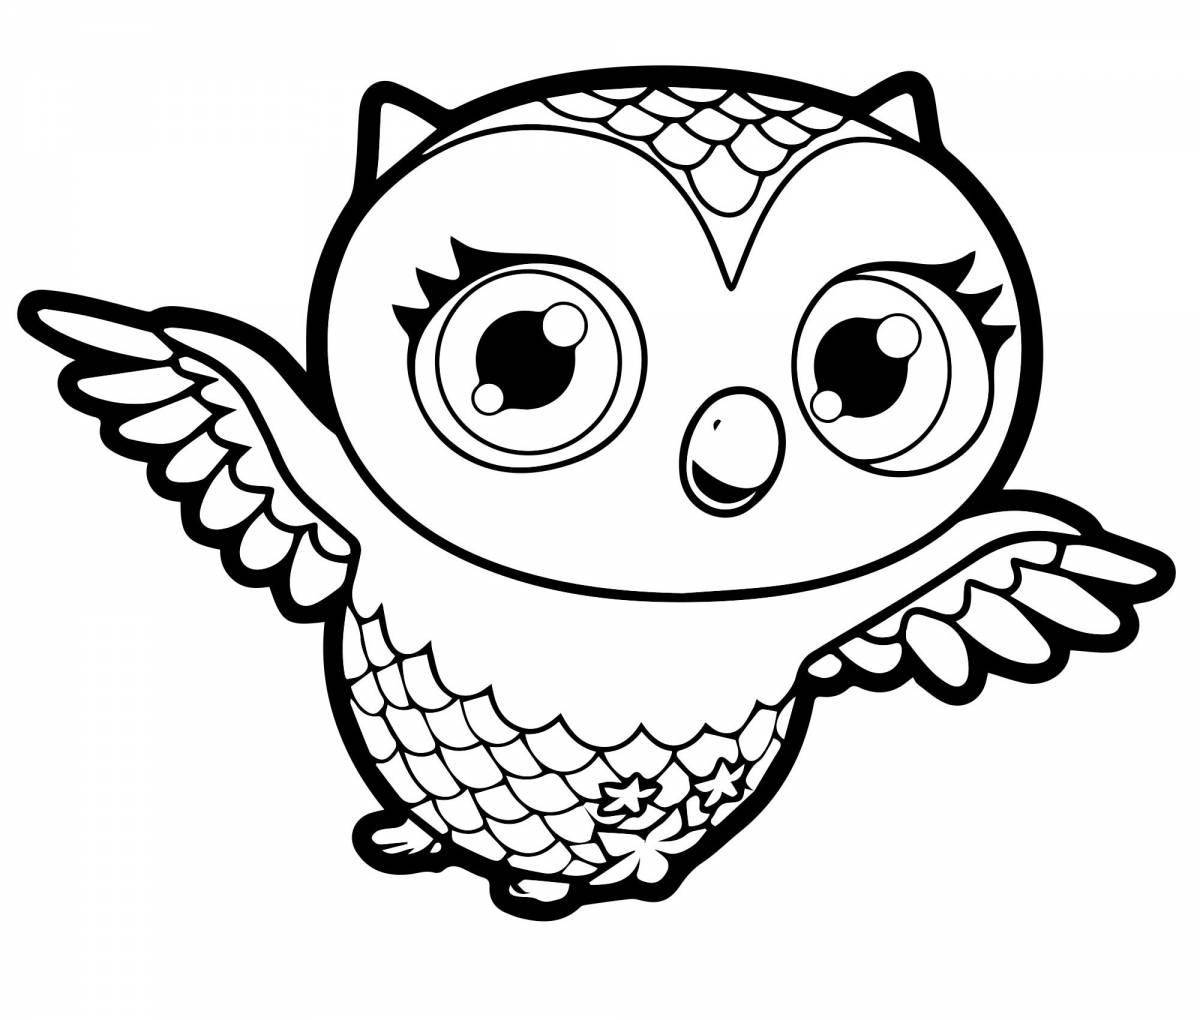 Animated owlet coloring page